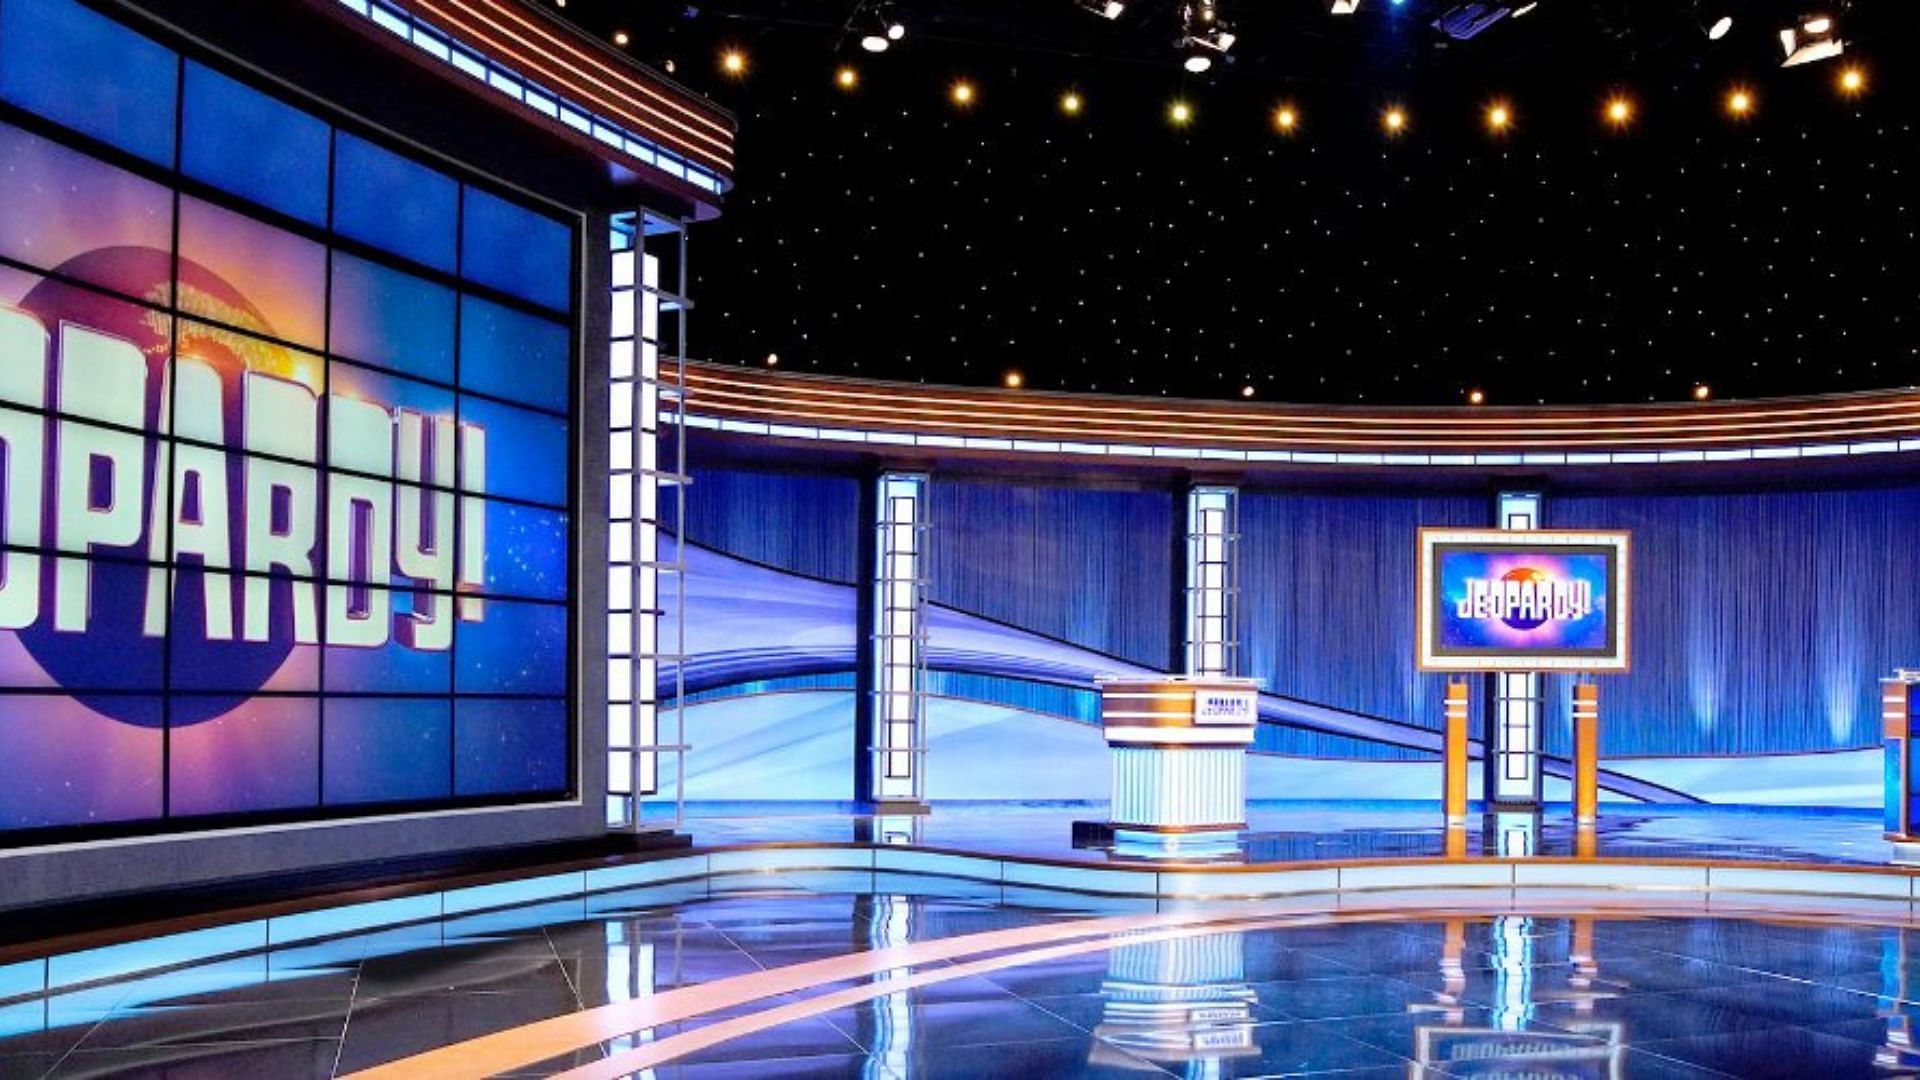 Who won Jeopardy! tonight? June 14, 2022, Tuesday Trusted Bulletin